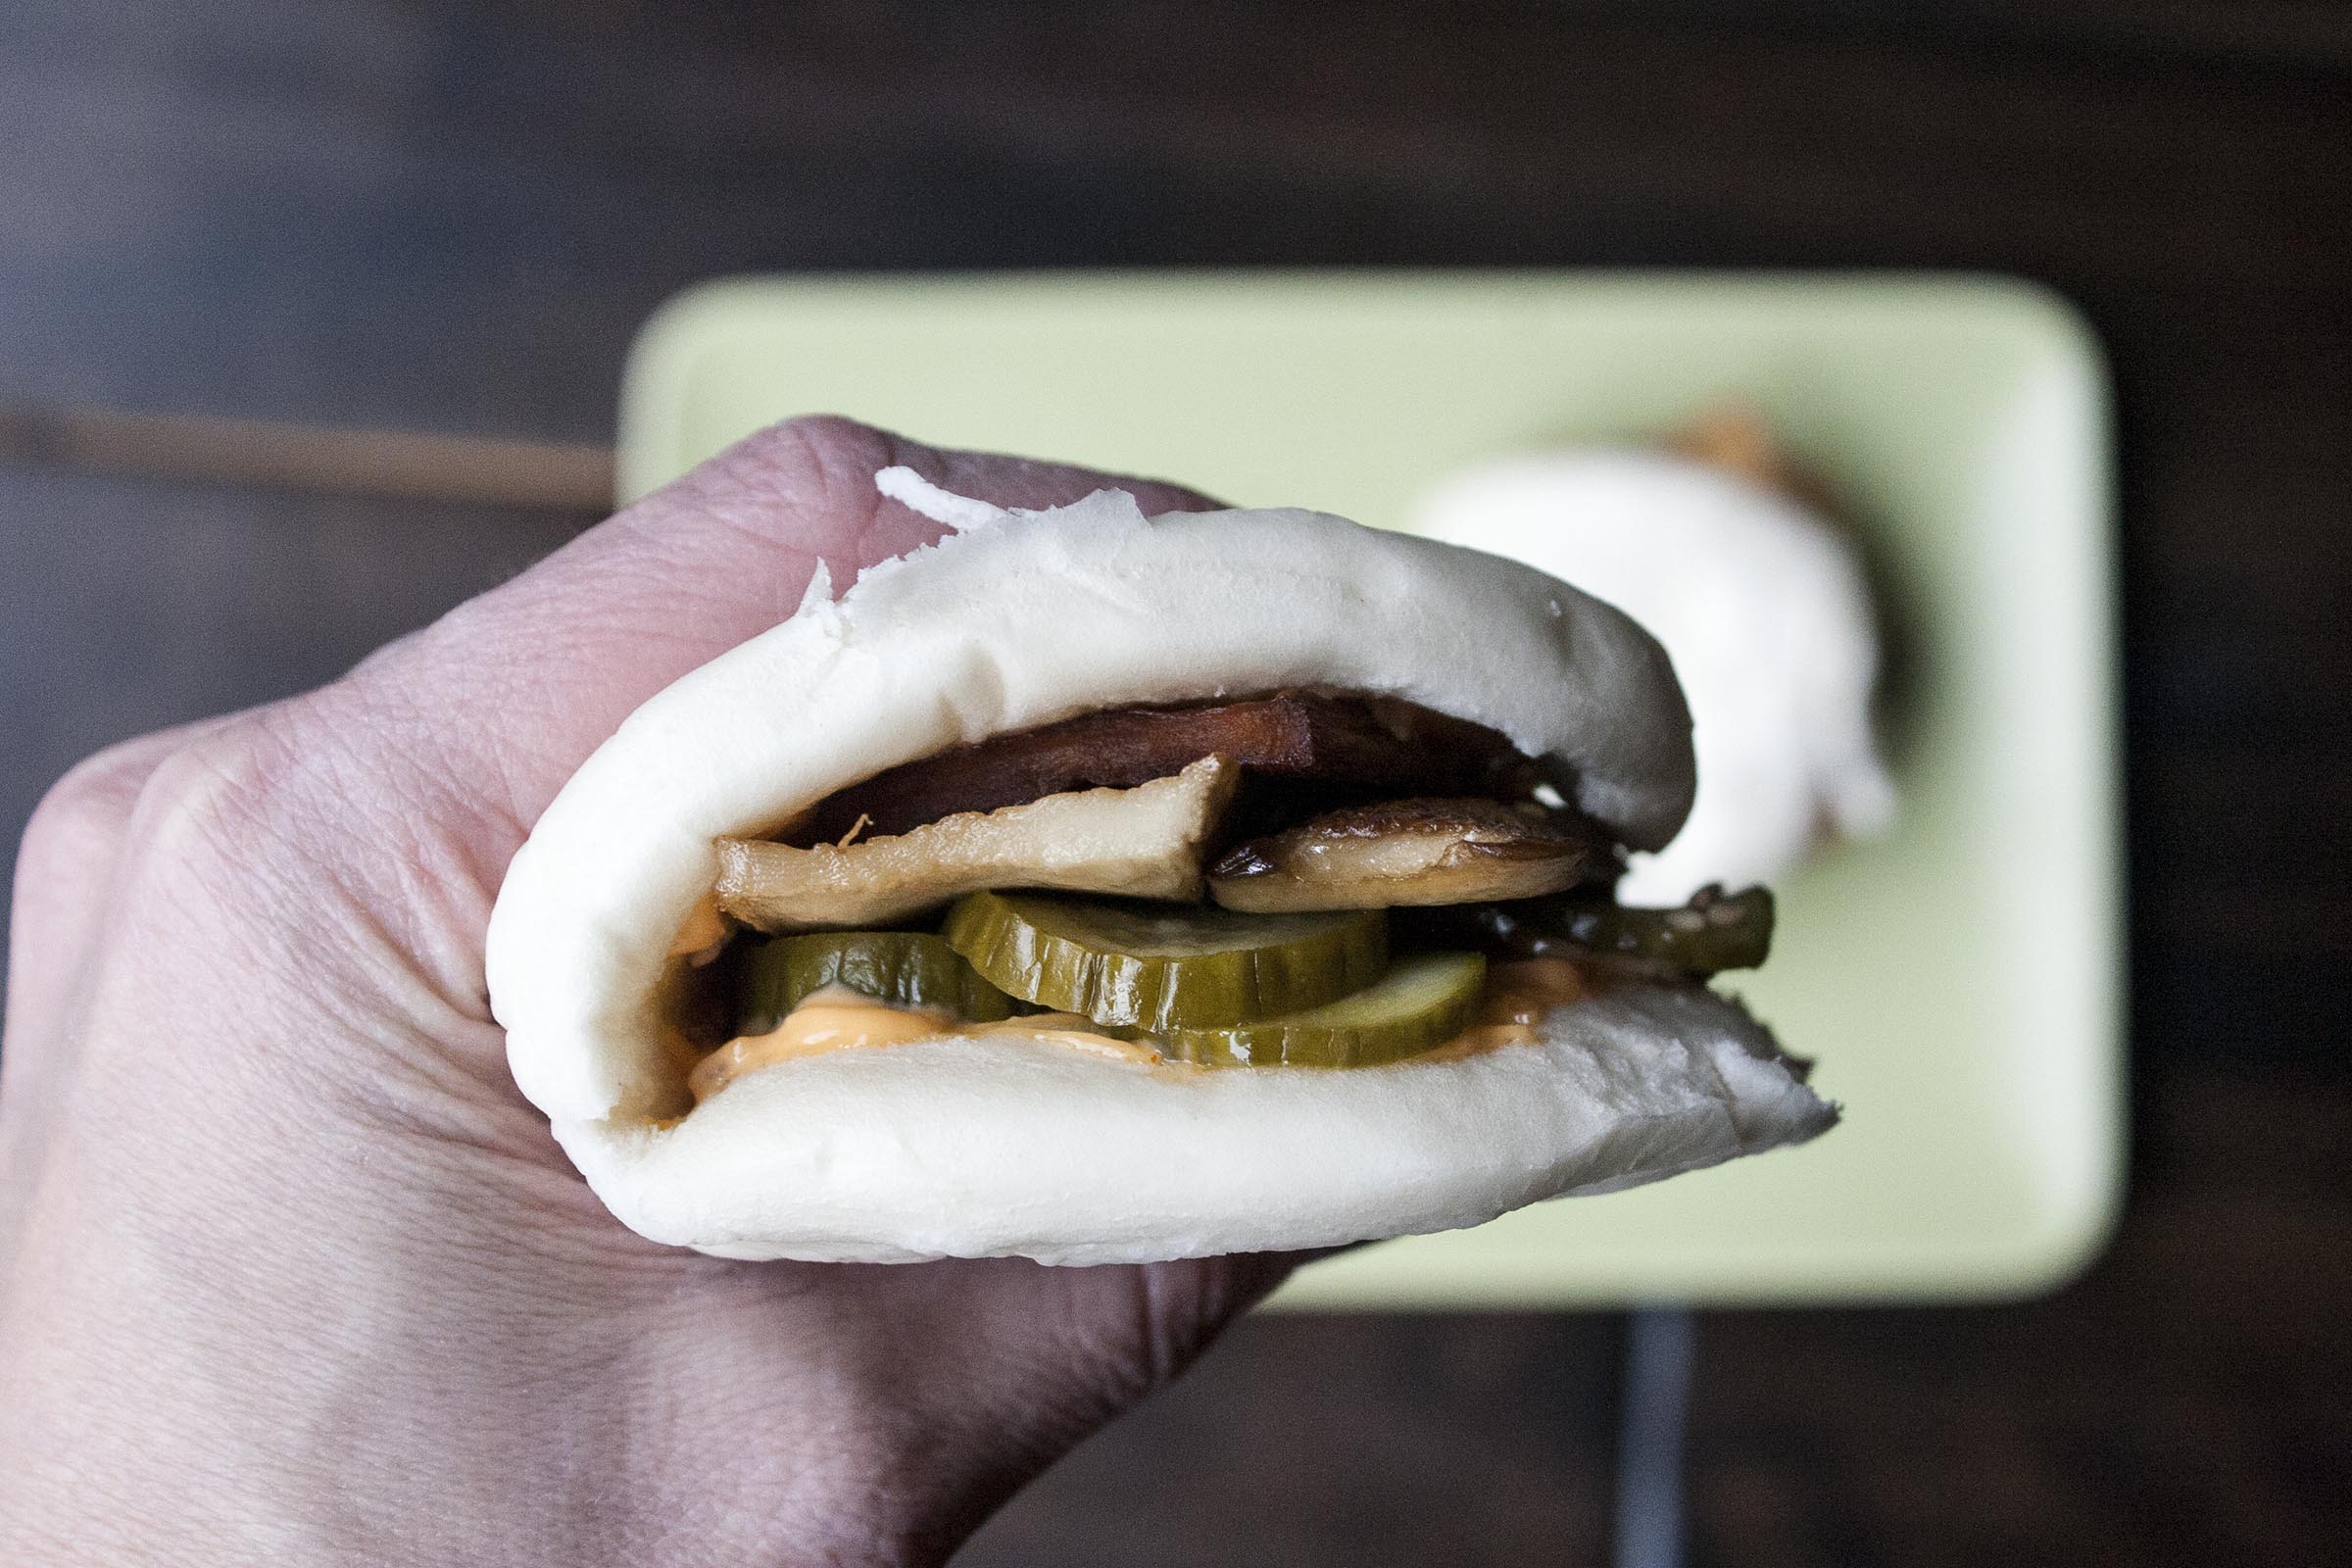 Steamed Bun filled with Sesame Chili Mayo, Rice Vinegar Pickles and Roasted King Mushrooms. lifeaswecookit.com